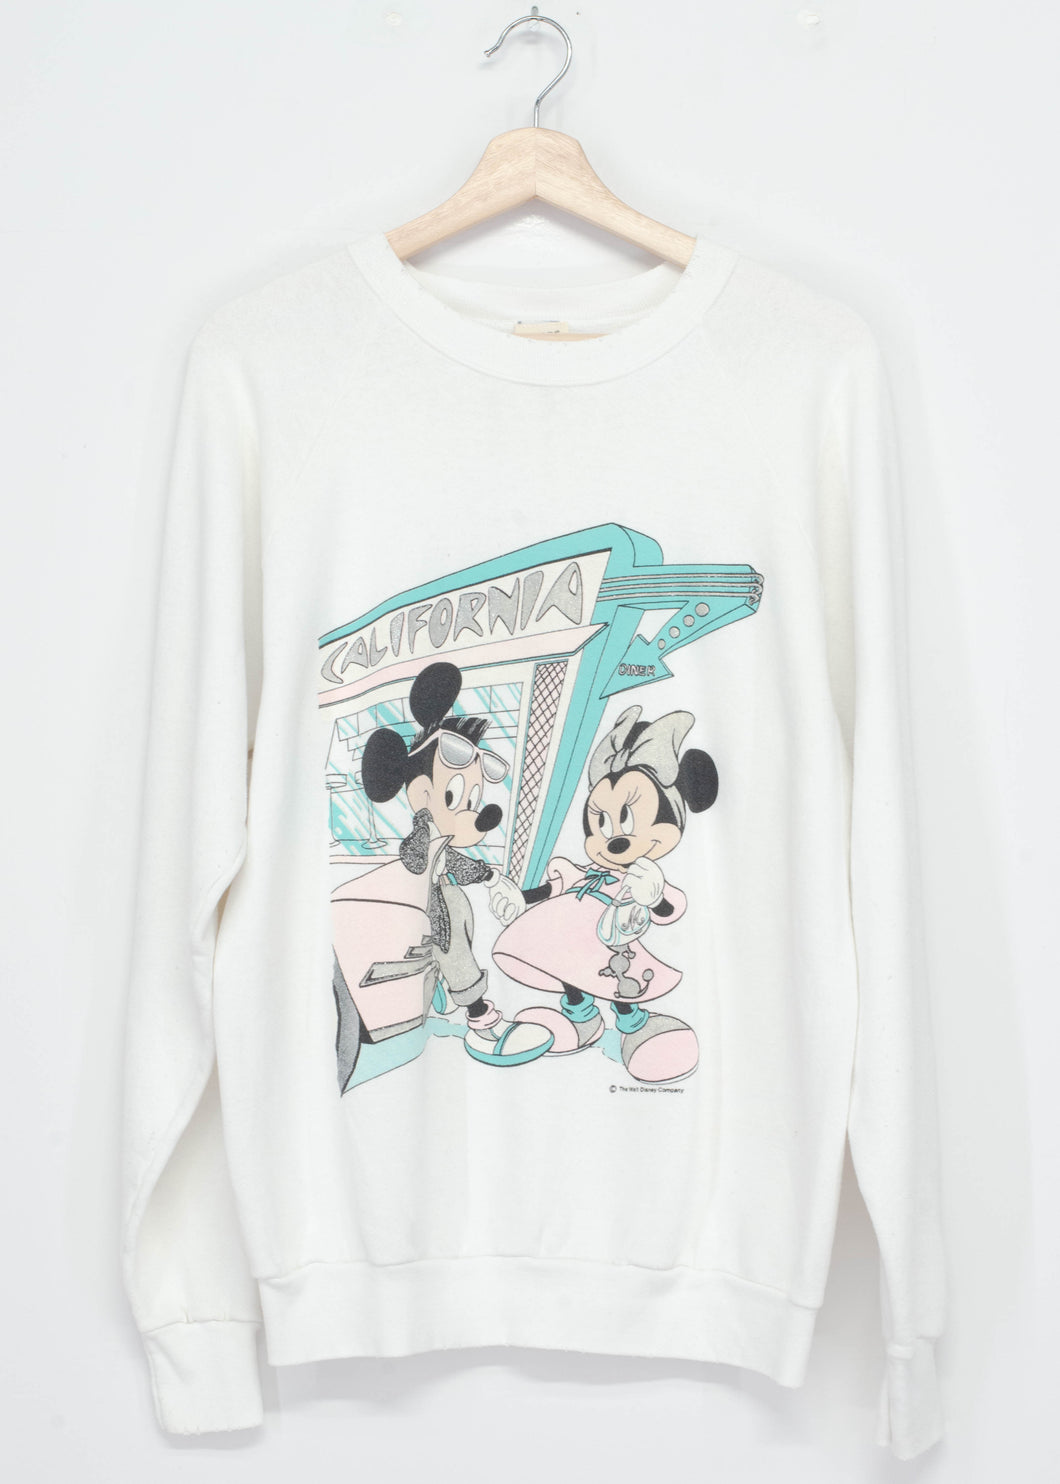 Vintage Mickey & Minnie Sweatshirt-M/L- Customize Your Embroidery Wording